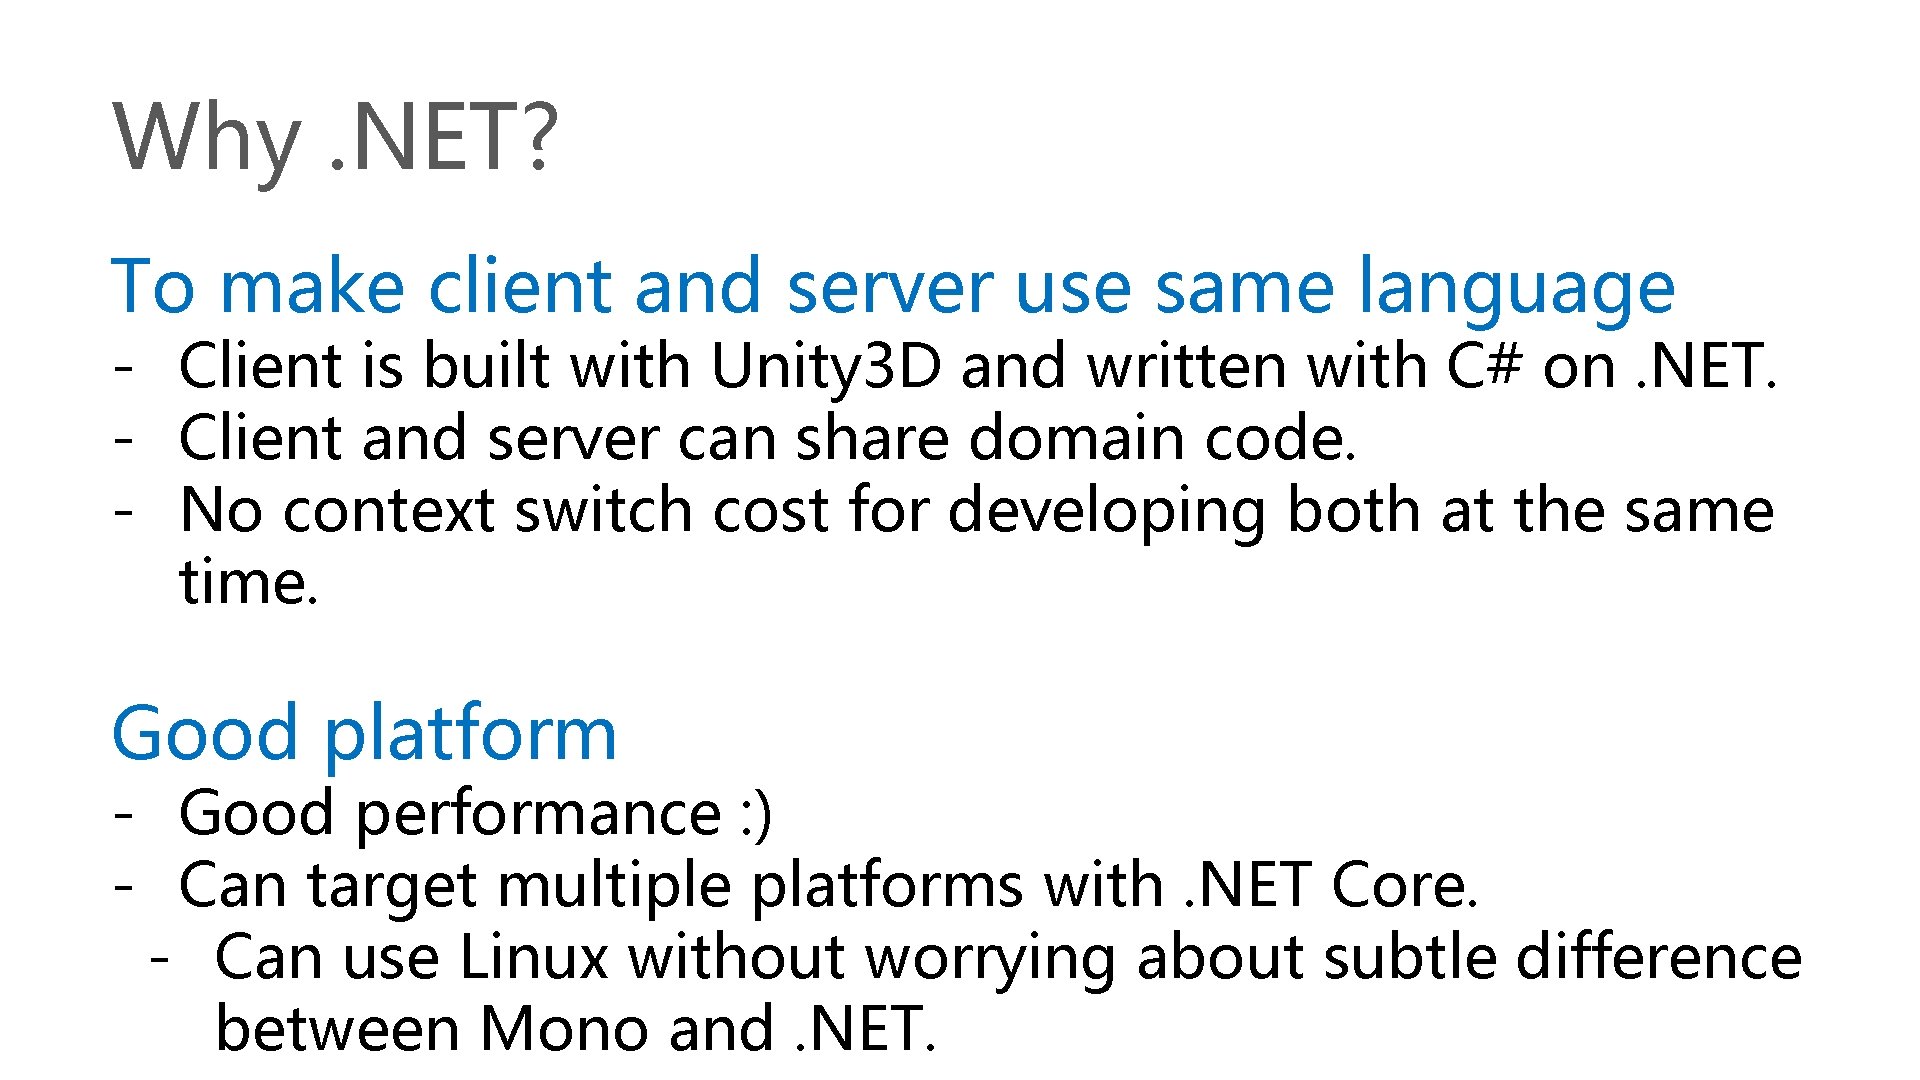 Why. NET? To make client and server use same language - Client is built